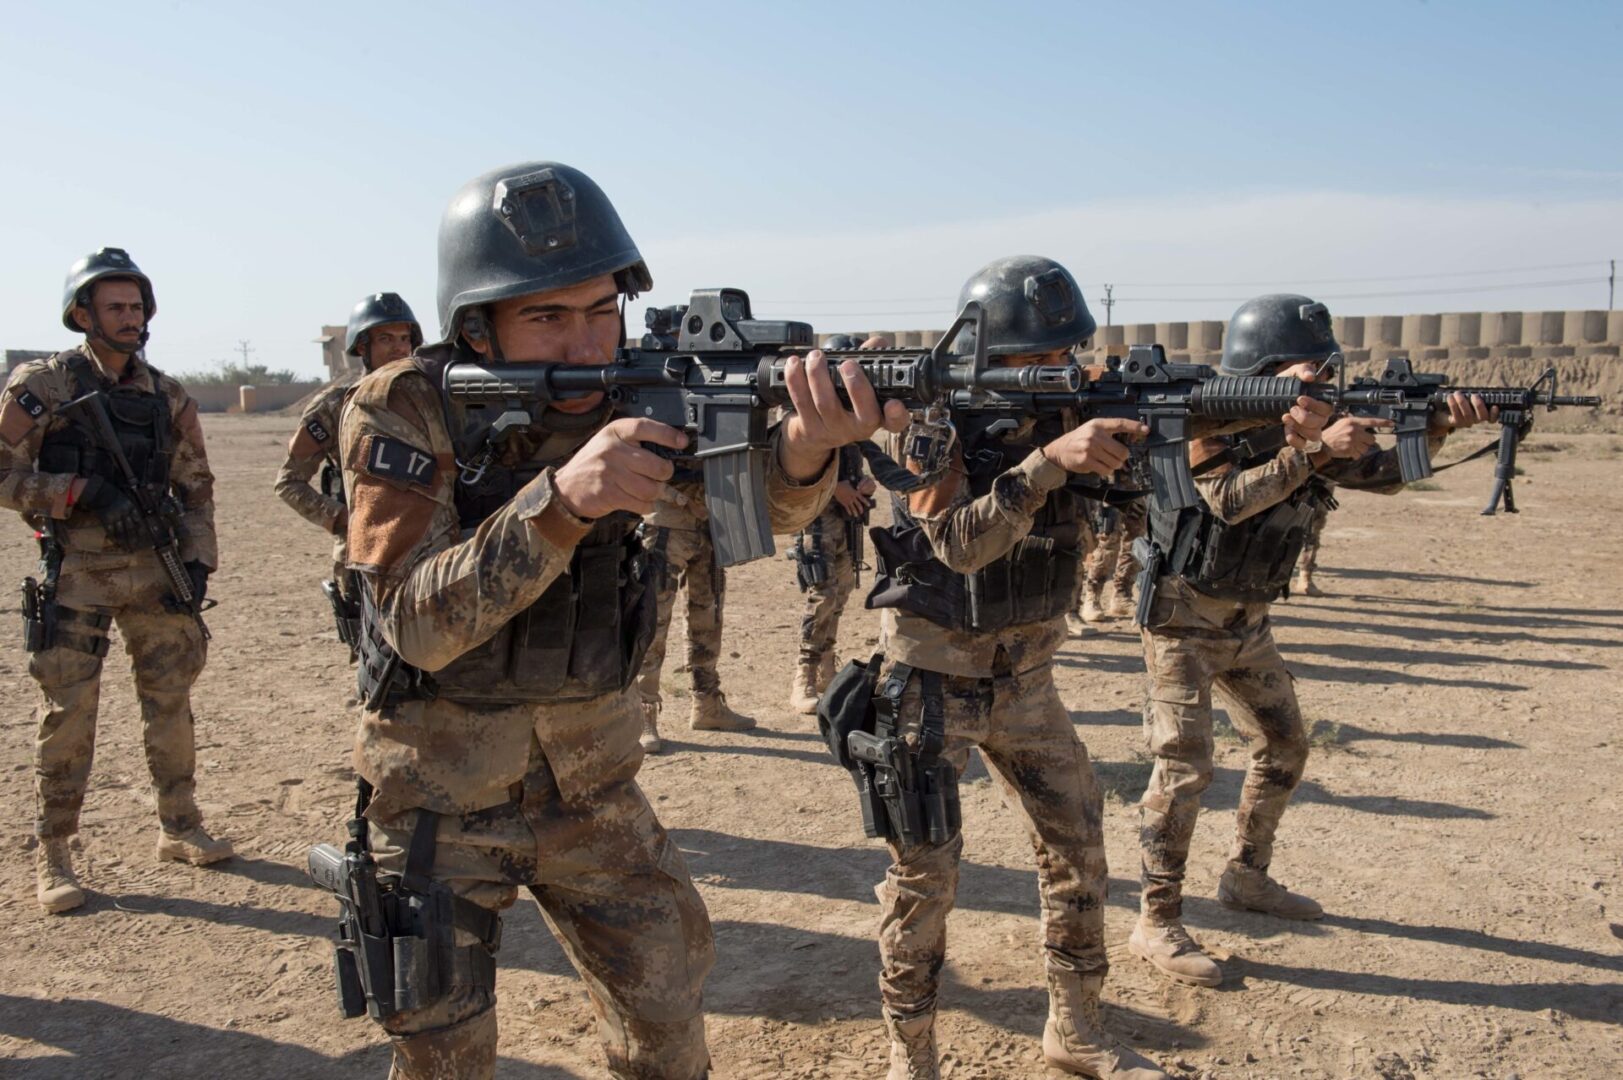 Iraq Army soldiers fire their rifles on a range as part of the Iraqi Counter-Terrorism Service’s selection process near Baghdad, Nov. 8, 2016. The CTS is Iraq’s elite counterterrorism force and has proven to be an effective fighting force against ISIL. 

This training is part of the overall Combined Joint Task Force – Operation Inherent Resolve building partner capacity mission to increase the capacity of partnered forces fighting ISIL. 

Combined Joint Task Force - OIR is the global Coalition to defeat ISIL in Iraq and Syria. (U.S. Army photo by Staff Sgt. Alex Manne)